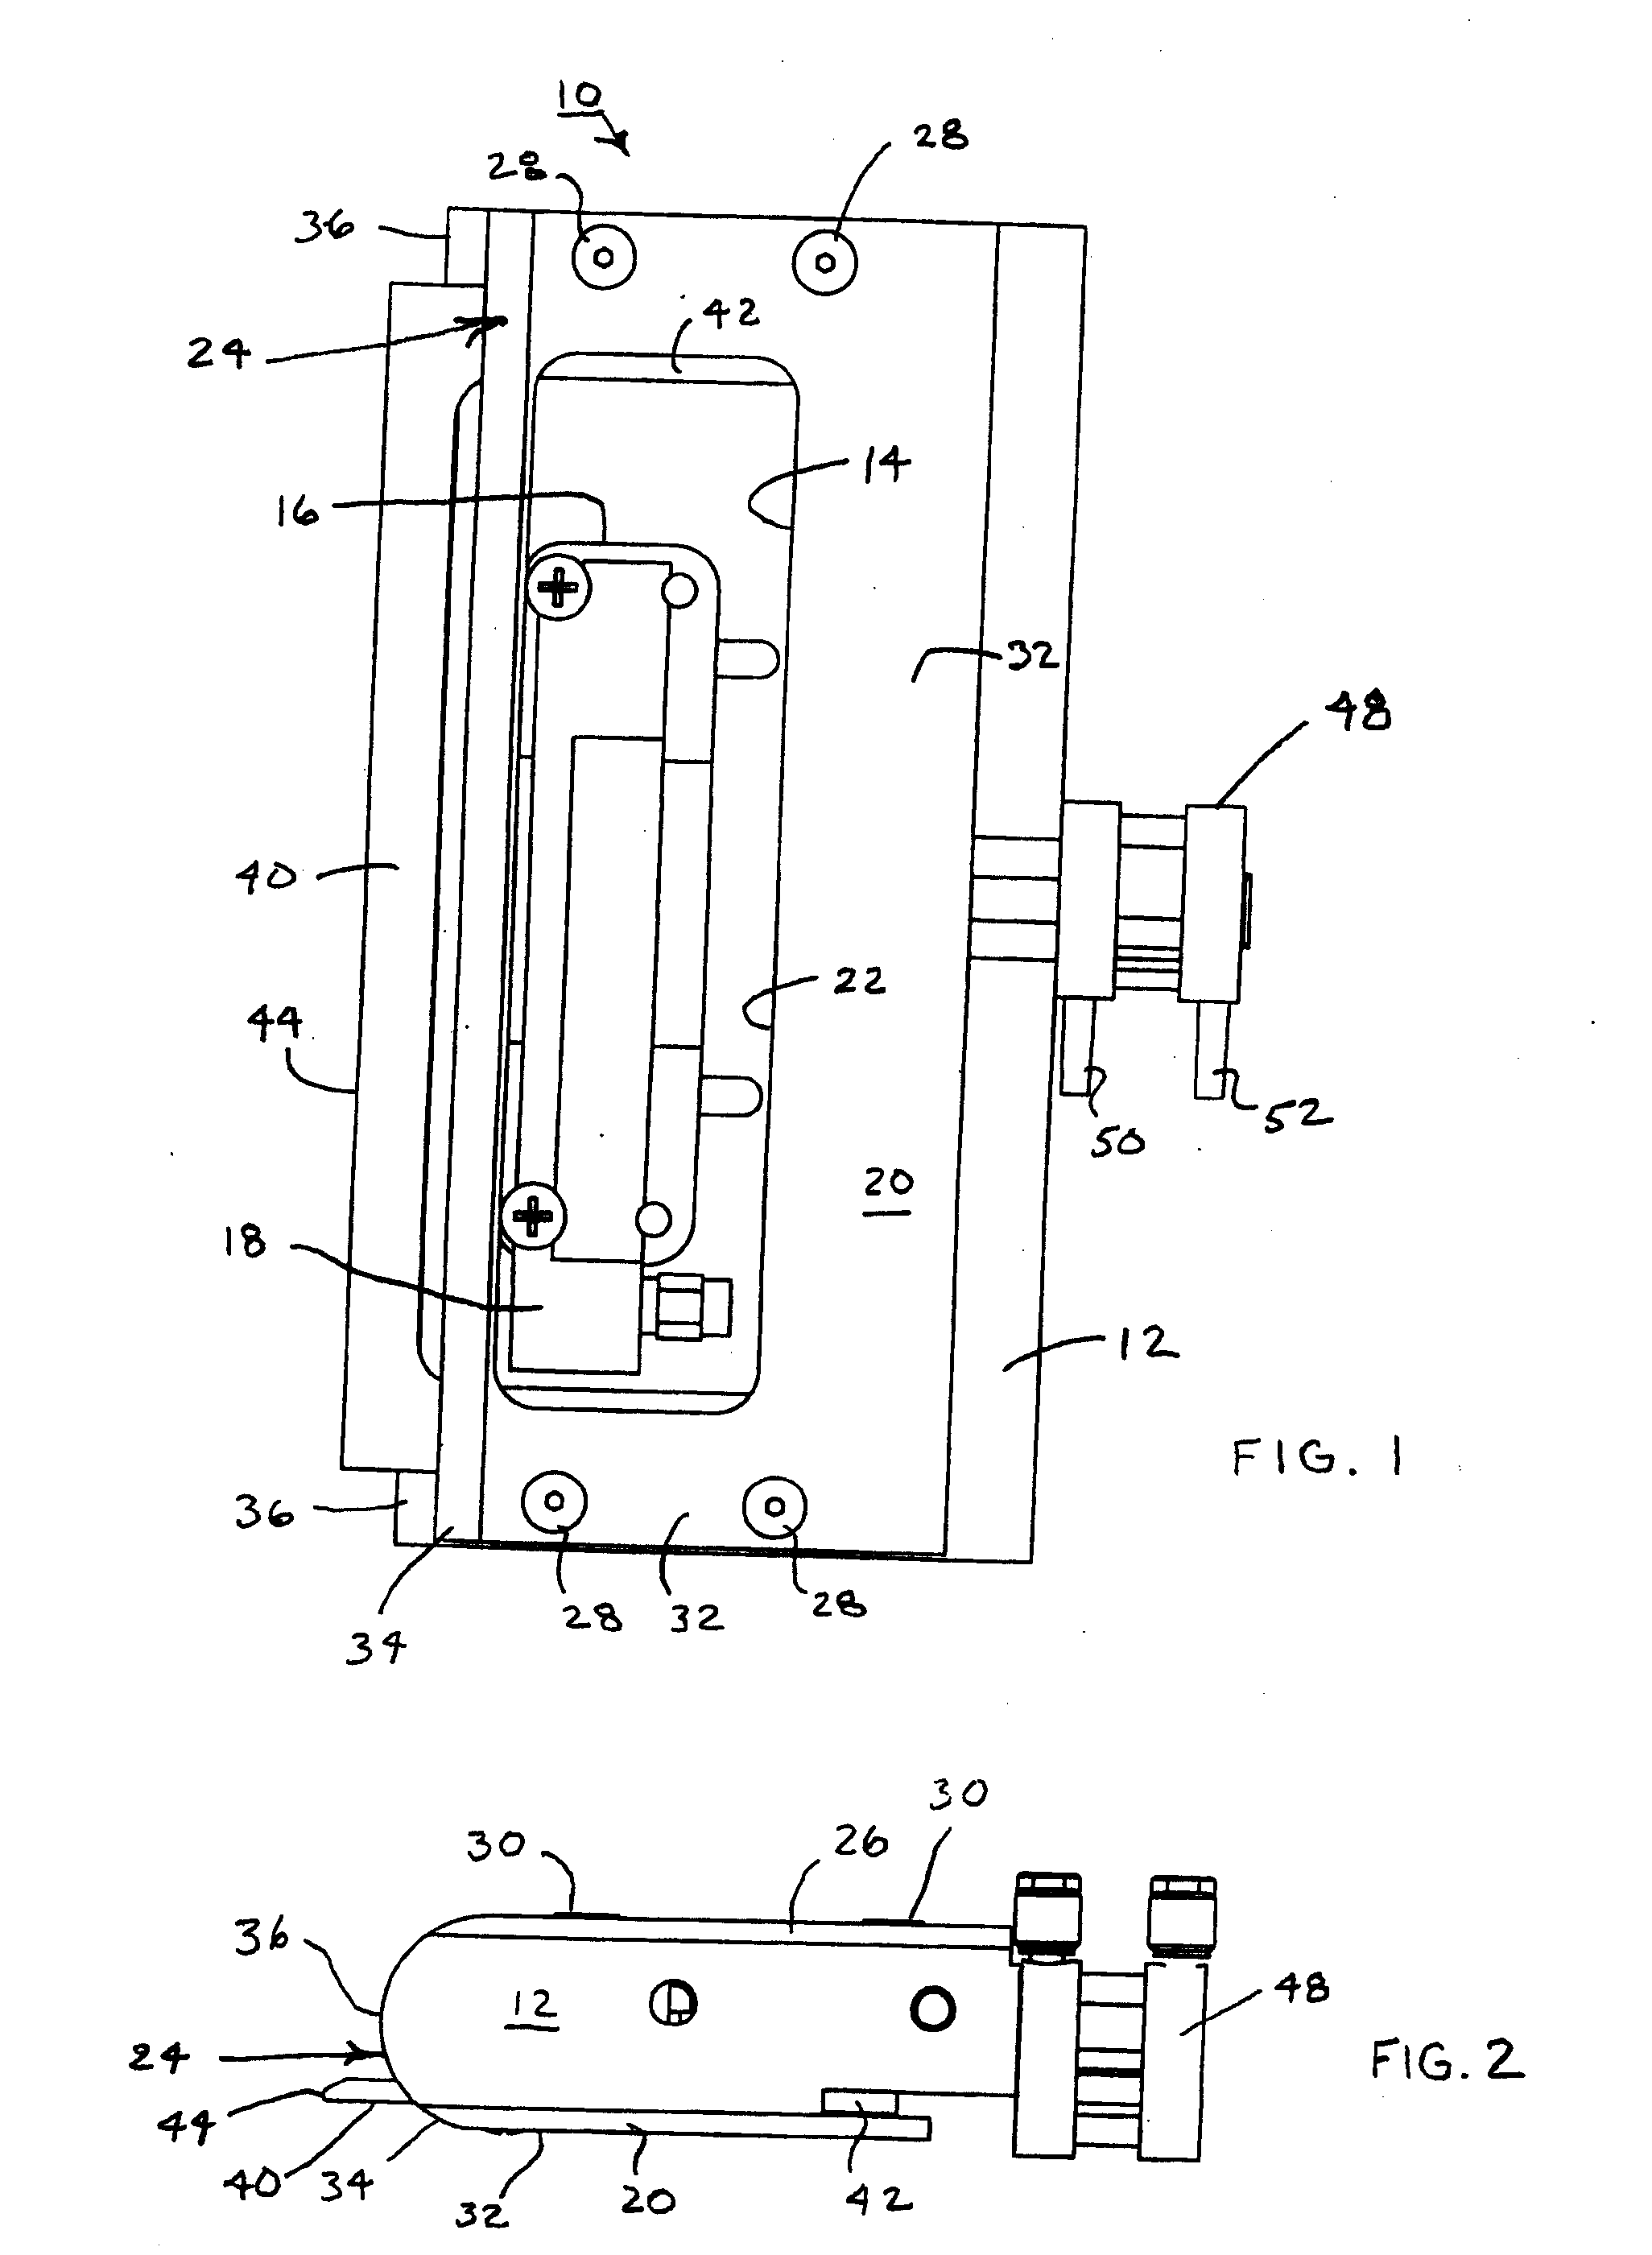 Peel plate assembly for removing programmable transponders from a web